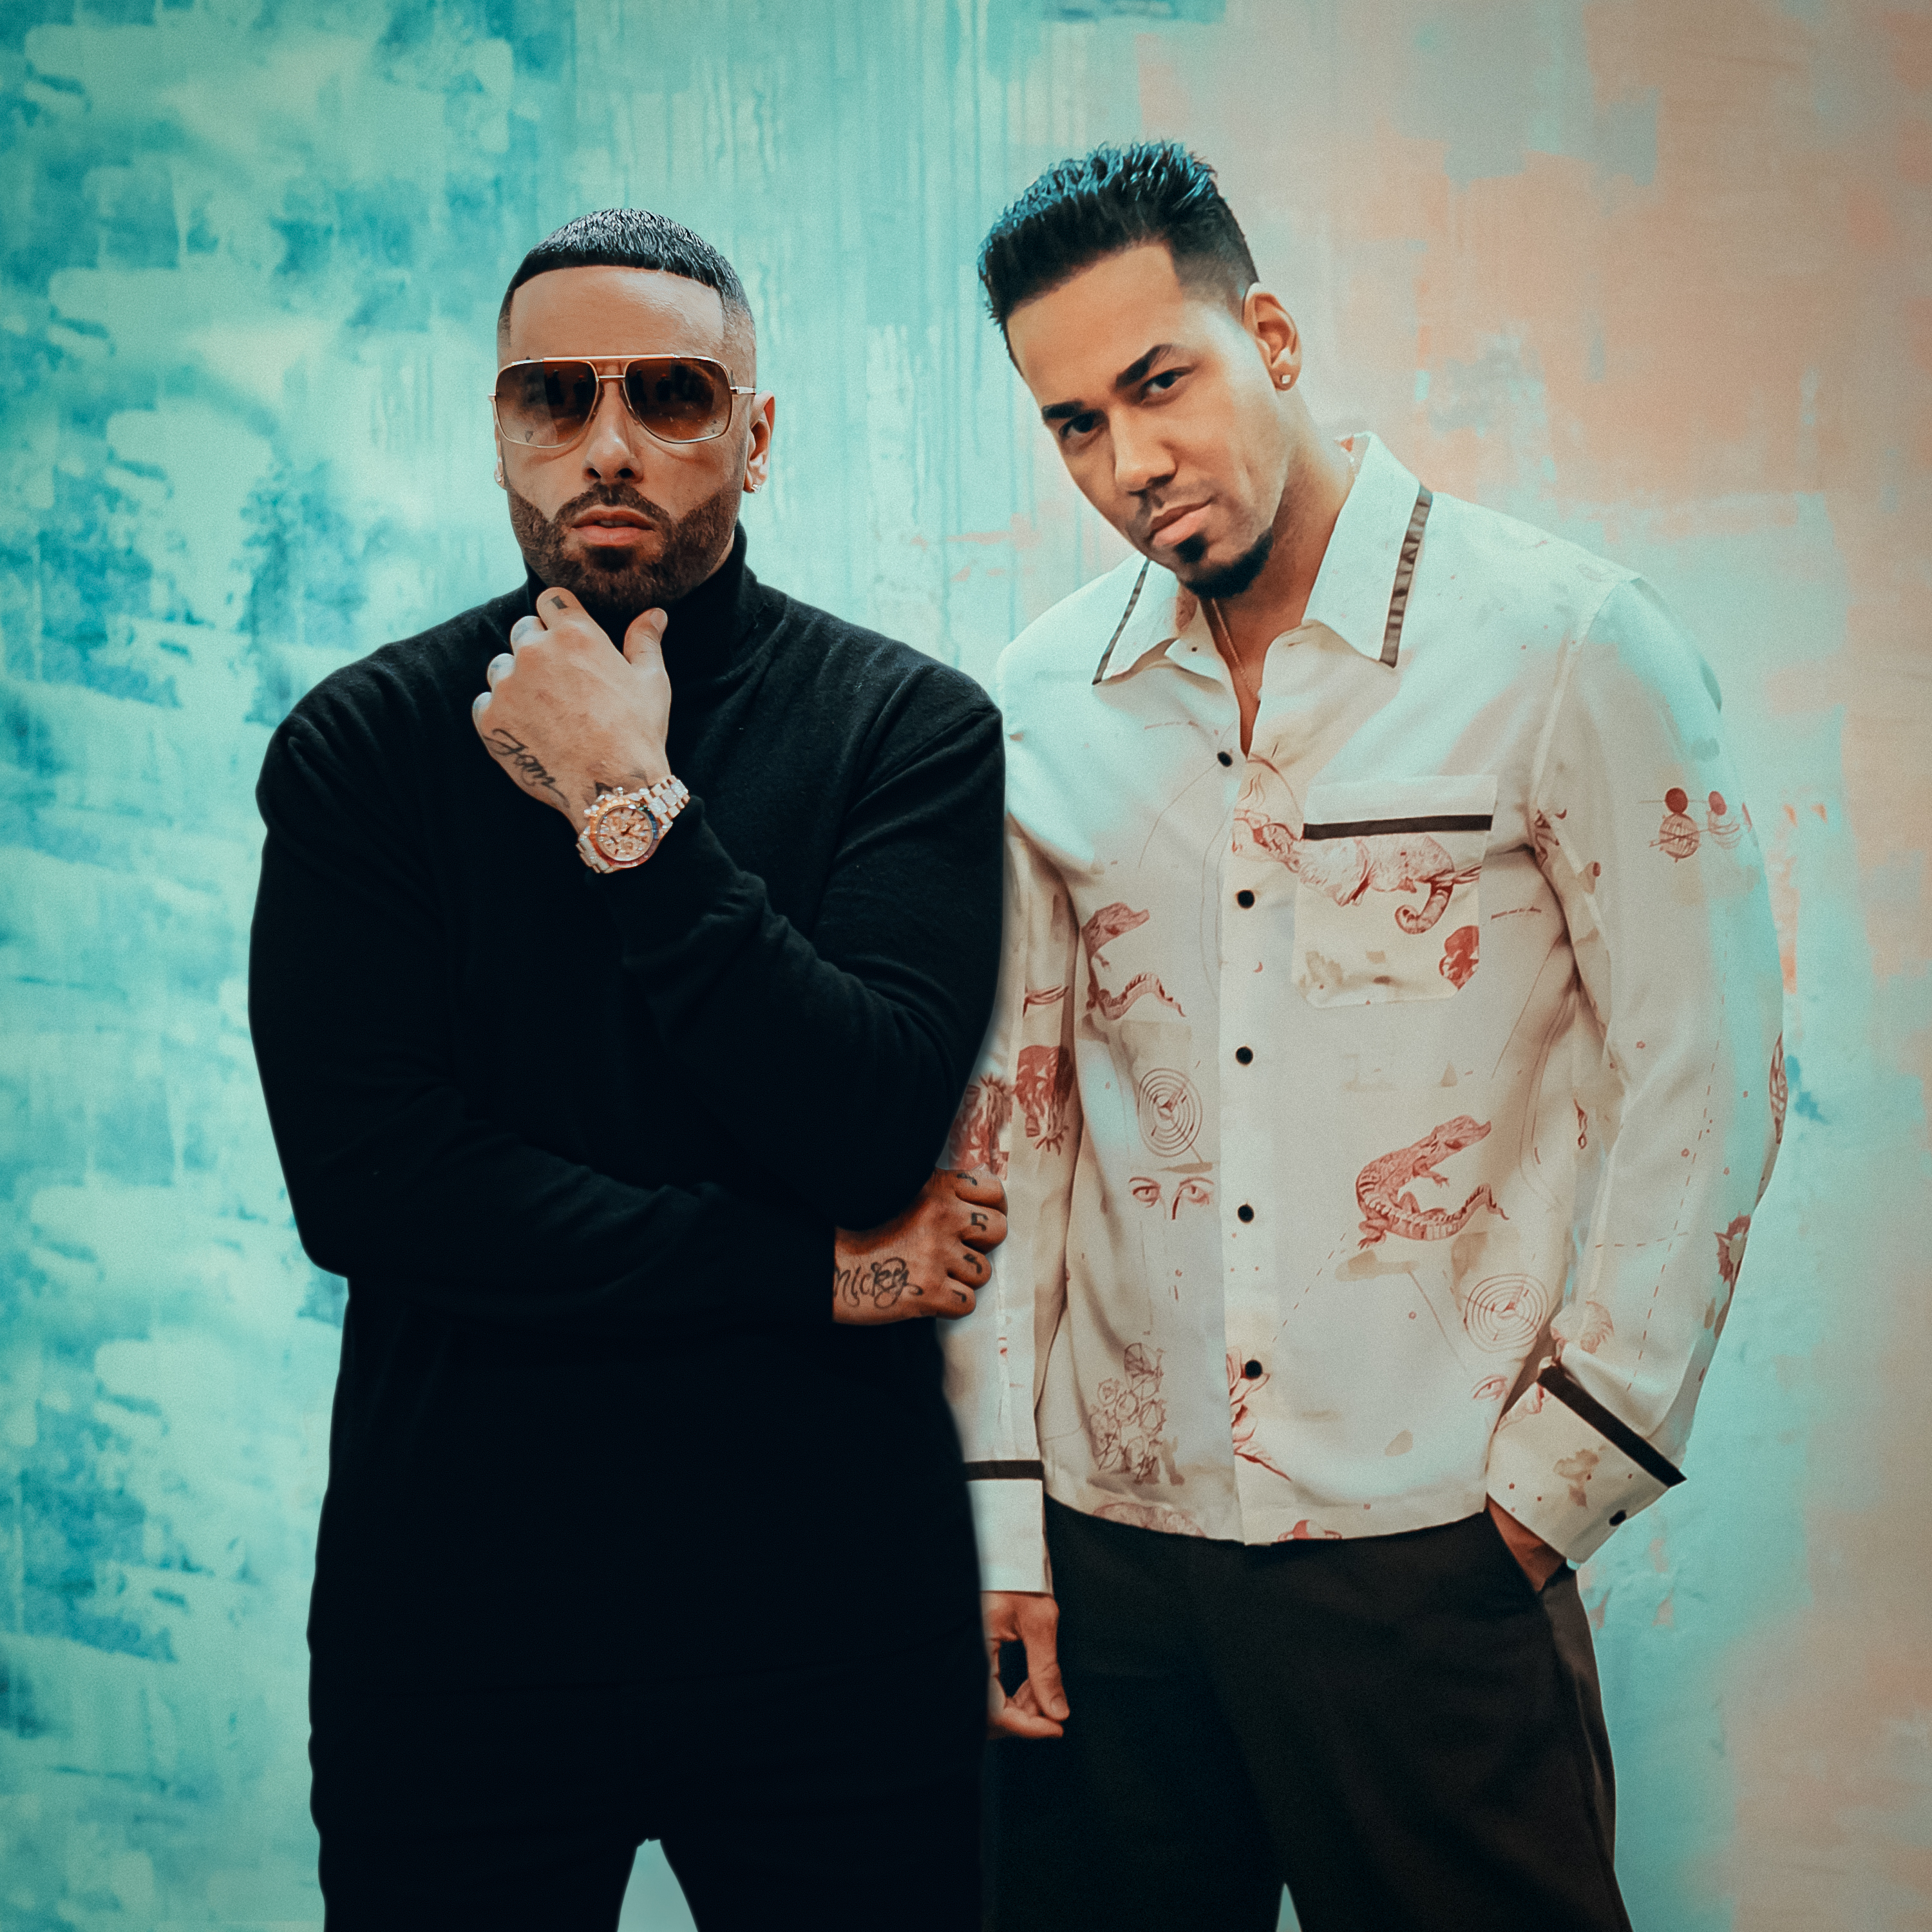 Nicky Jam Romeo Santos Fall In Love With The Same Woman In Fan De Tus Fotos Video